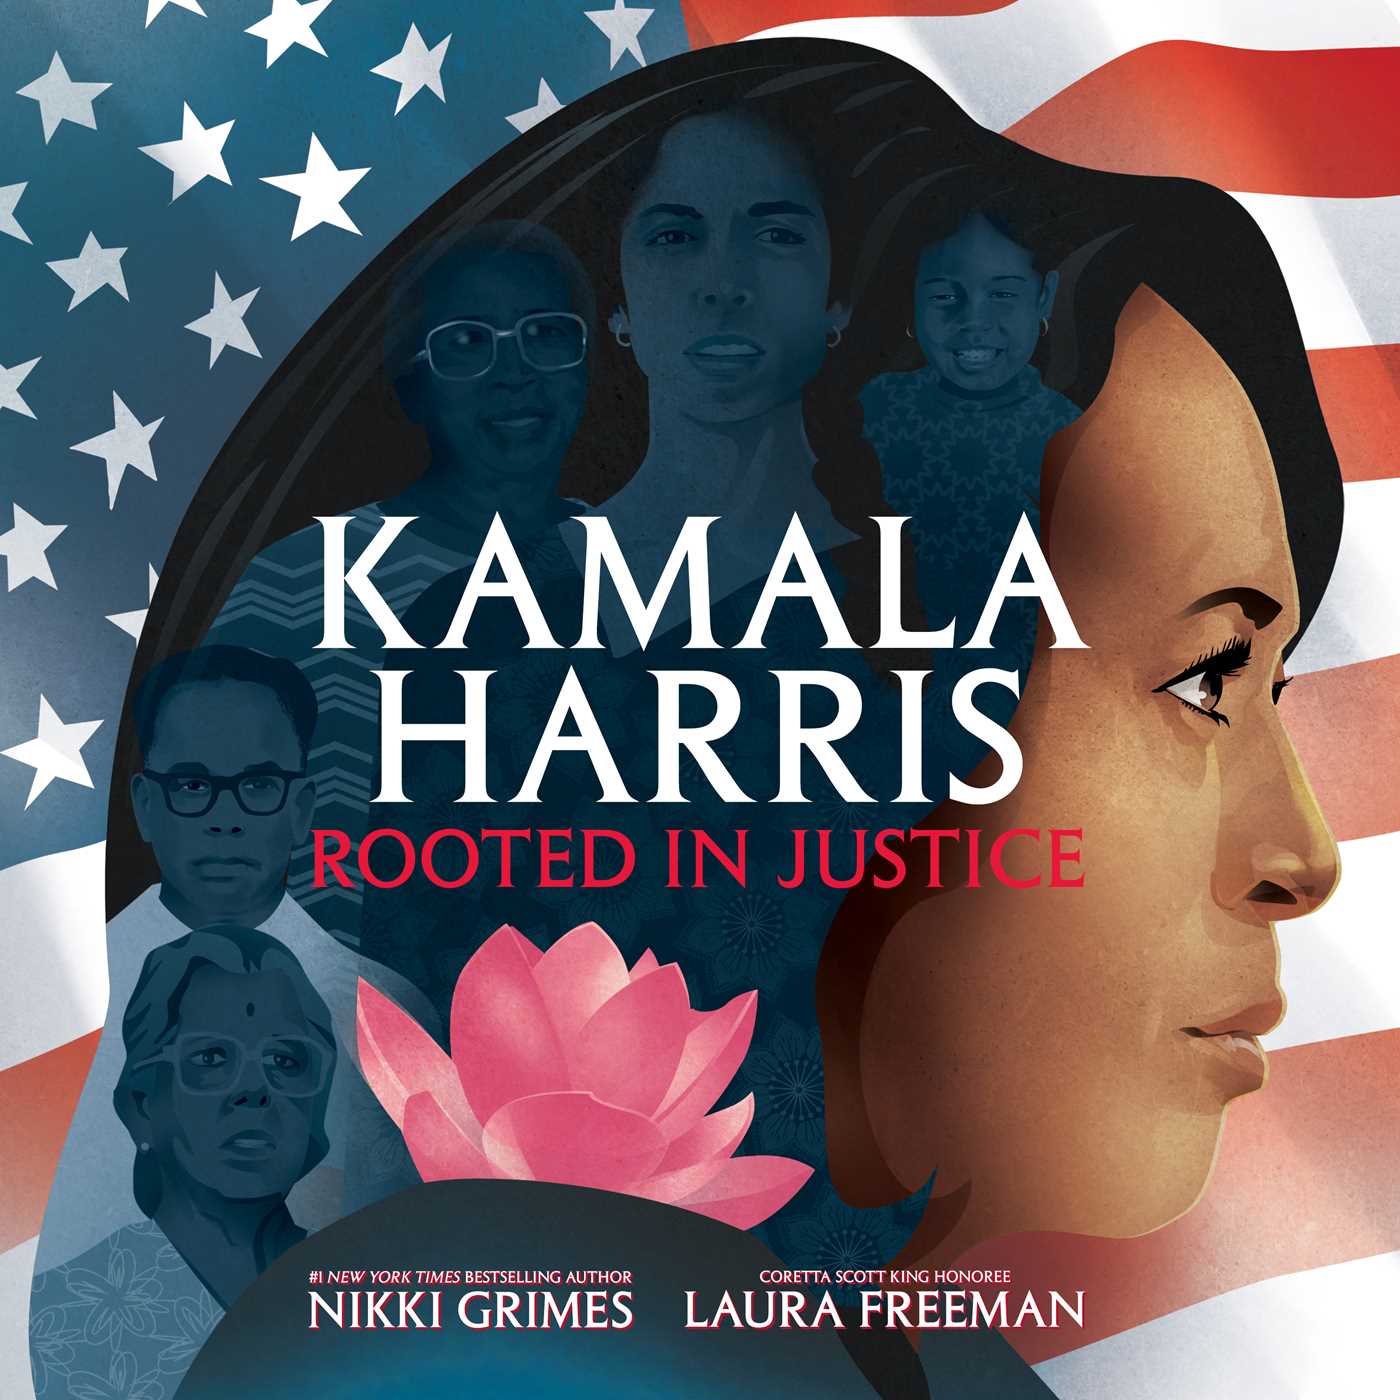 Kamala Harris: Rooted in Justice by Nikki Grimes